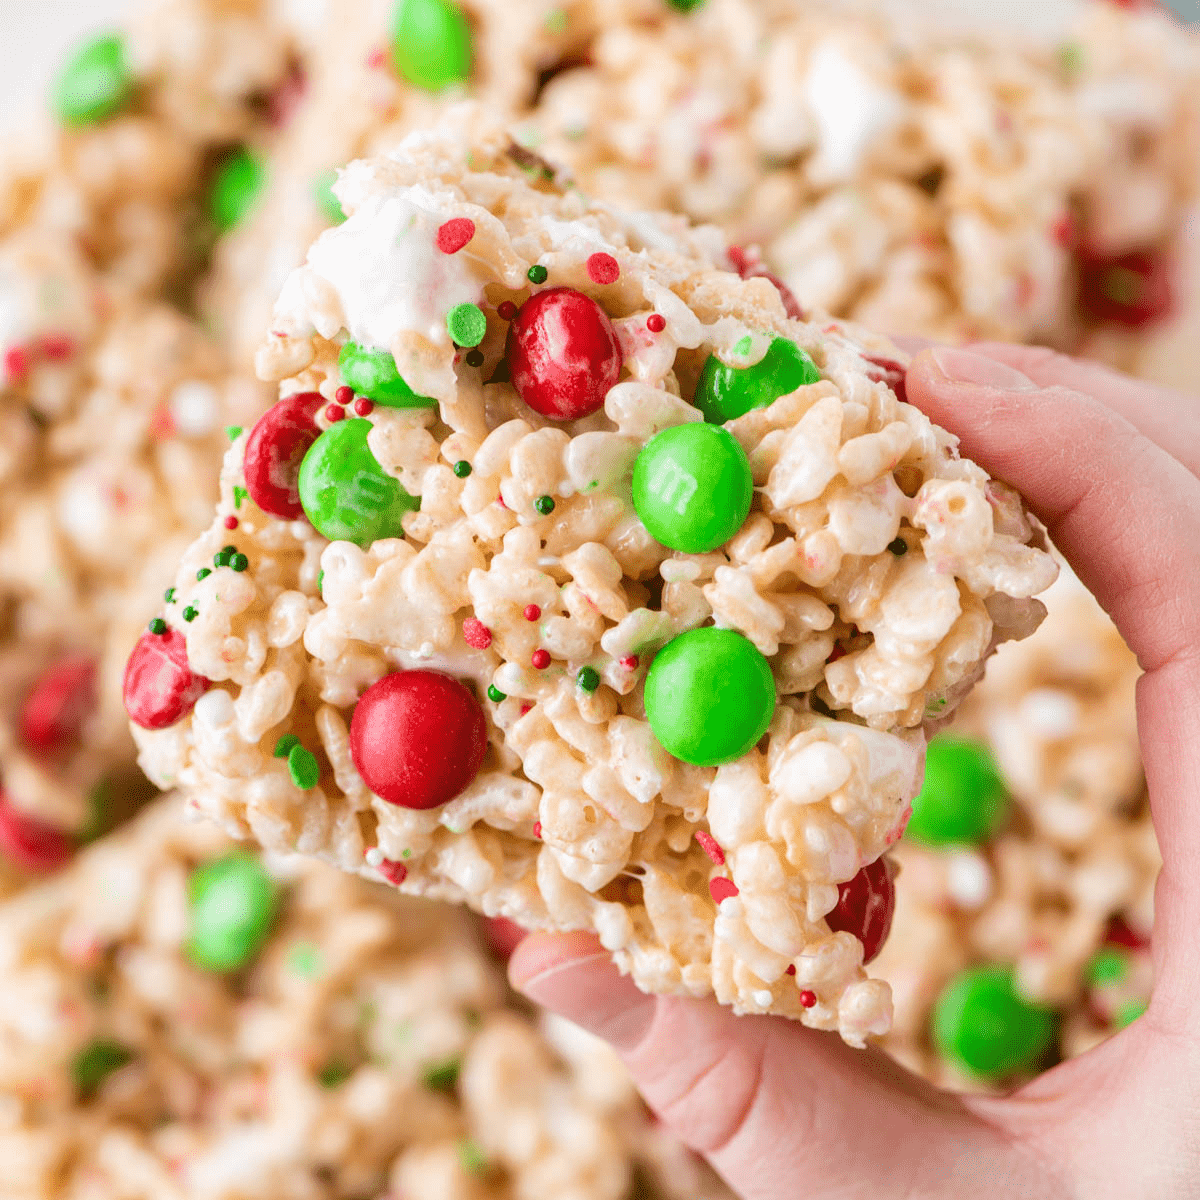 Review: Holiday Rice Krispies Treats Blasted with M&M's Minis